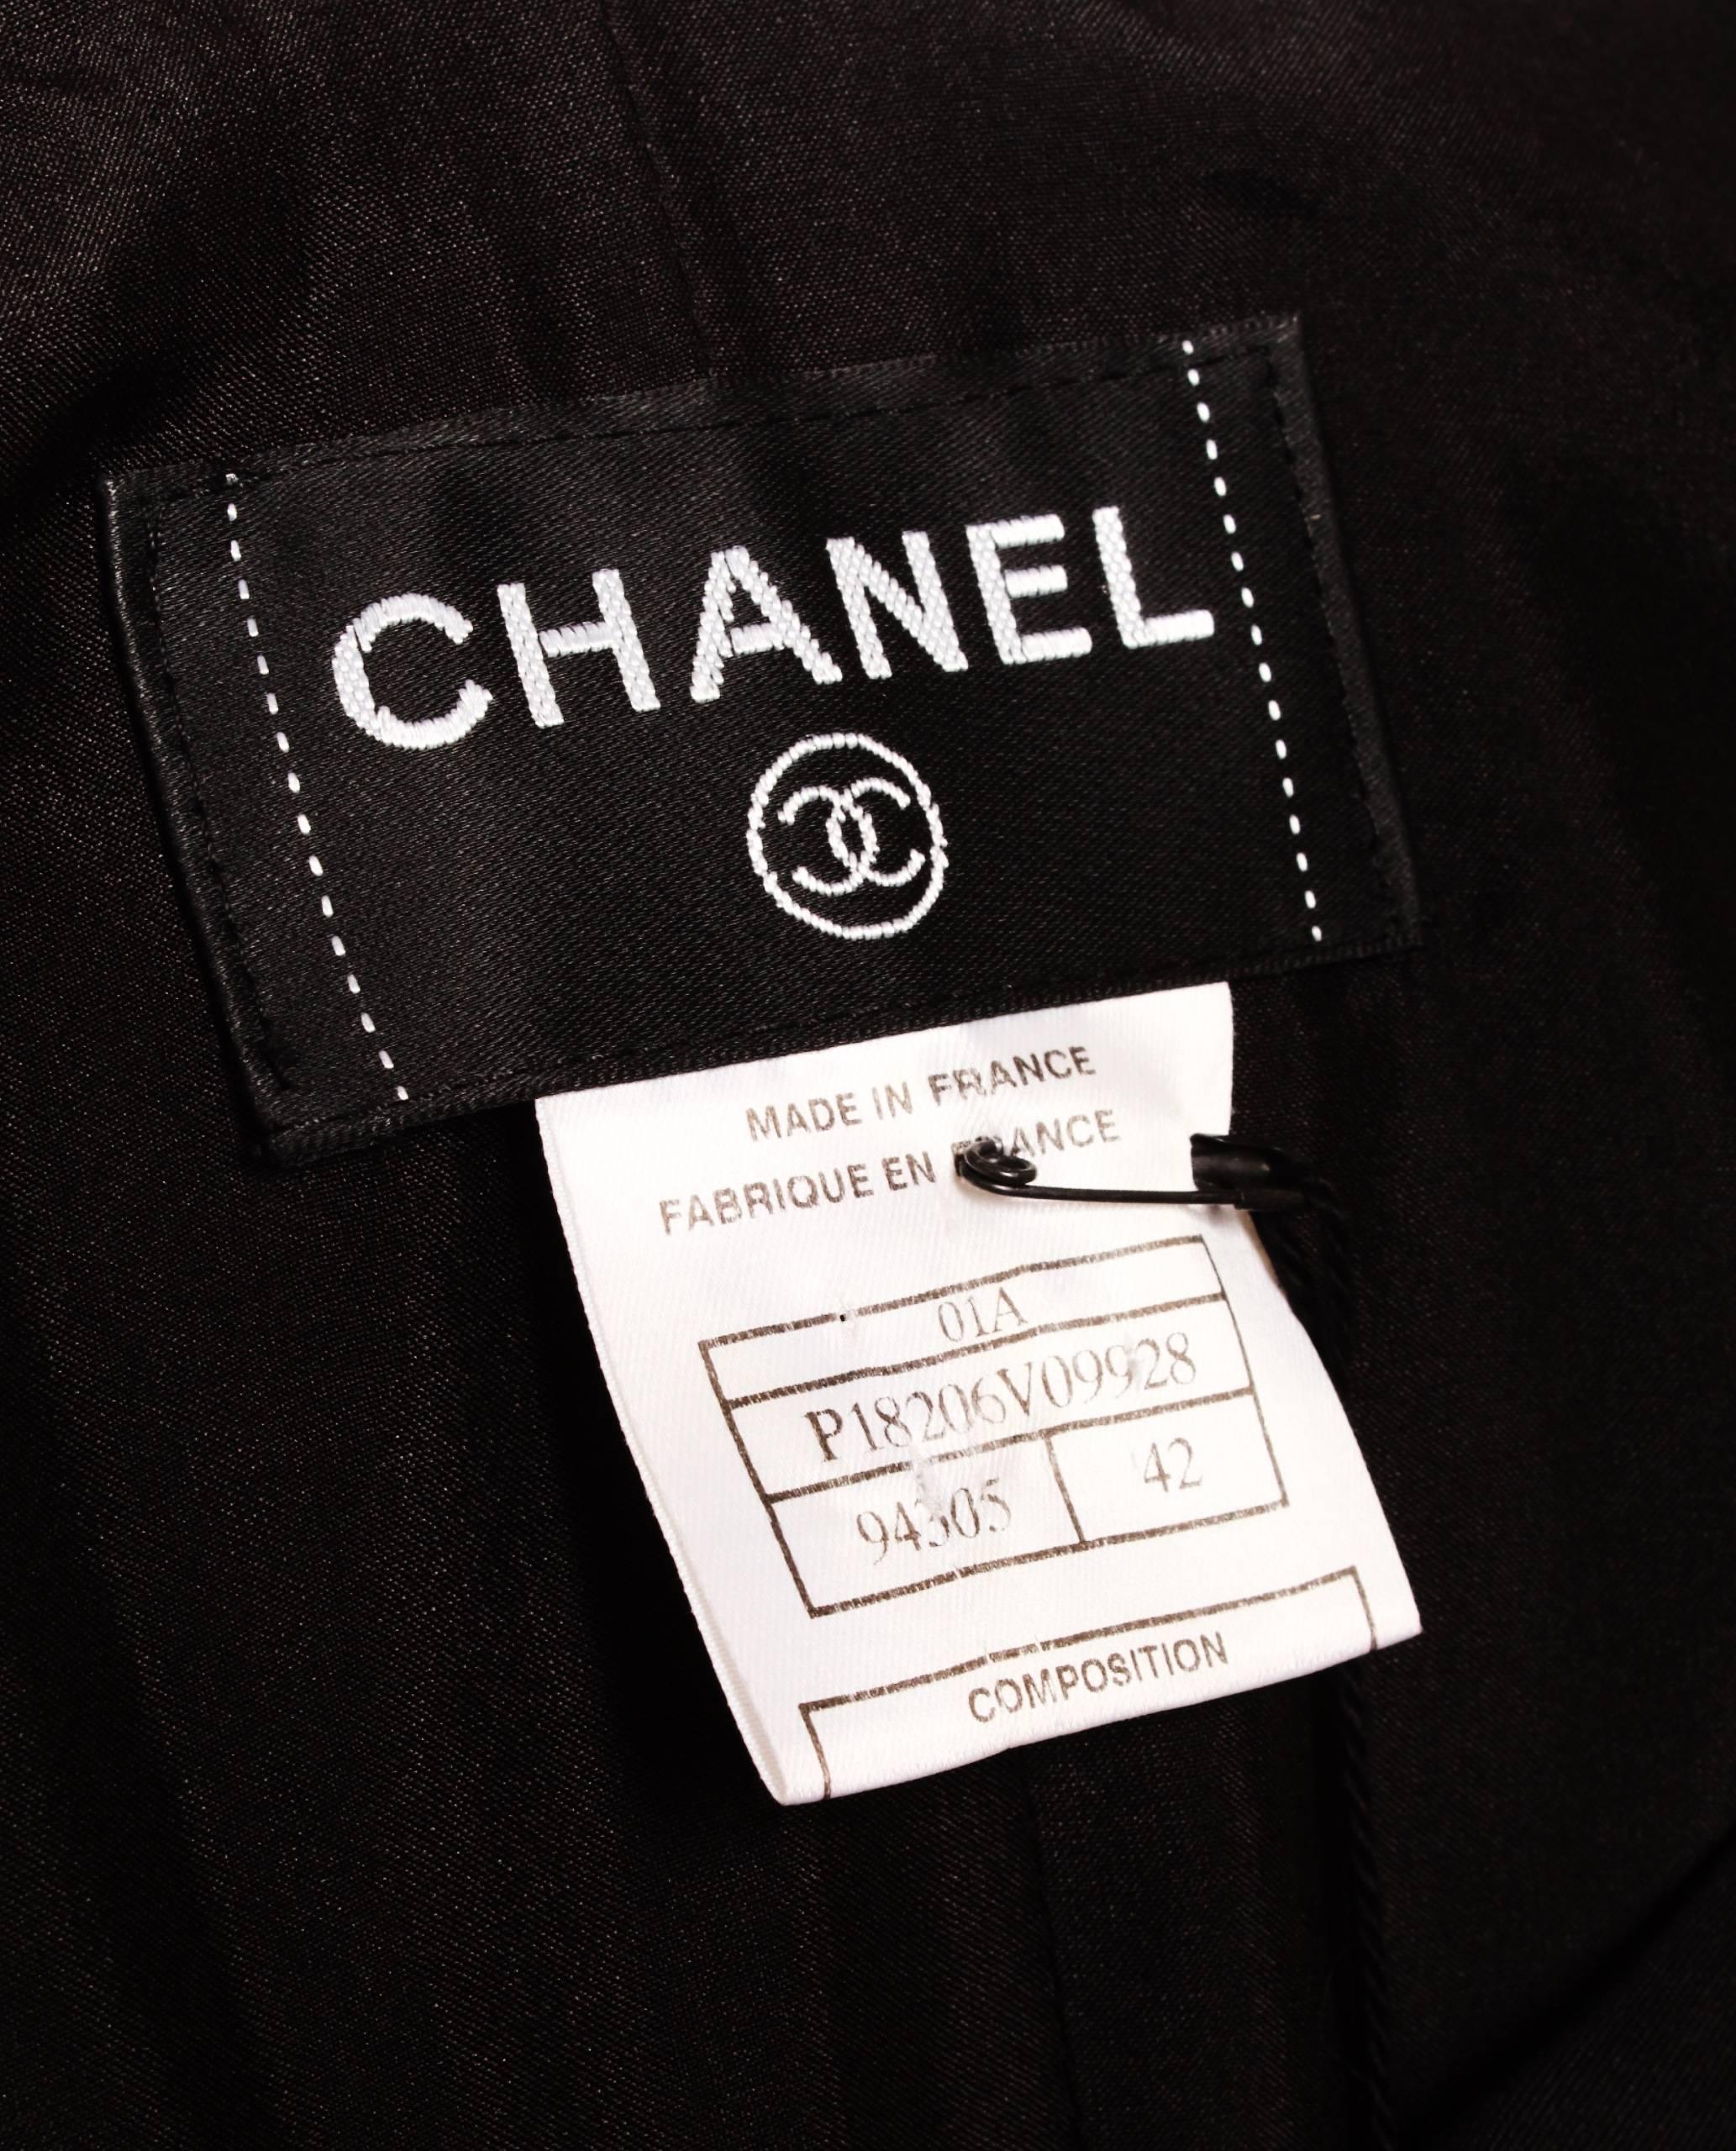 Chanel Little Black Dress In Good Condition For Sale In Melbourne, Victoria